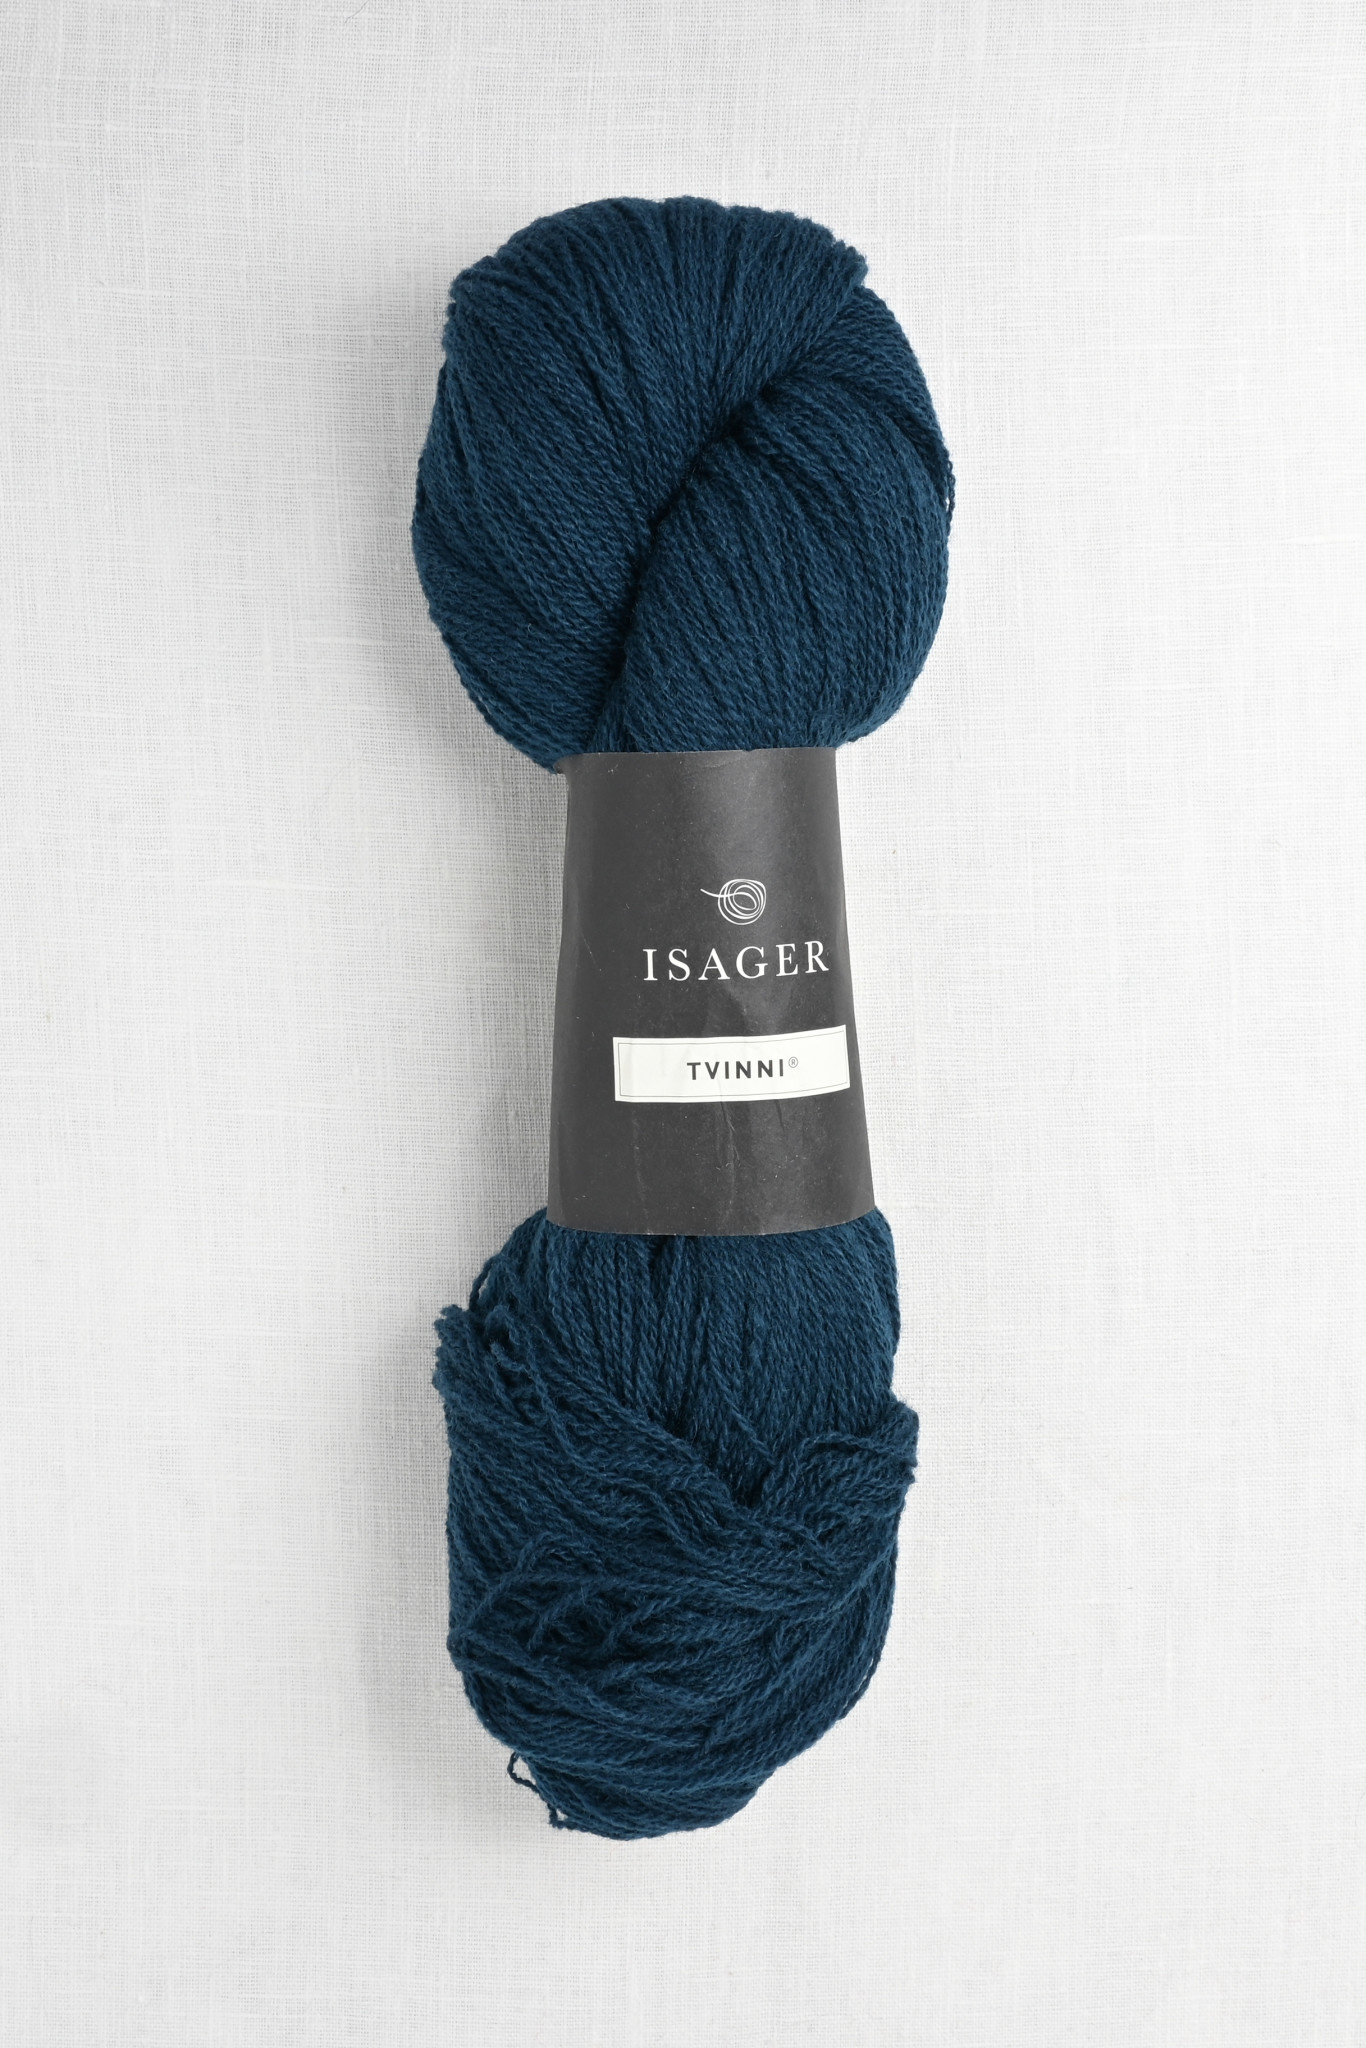 overrasket statsminister Bug Isager Tvinni 101 Ocean - Wool and Company Fine Yarn